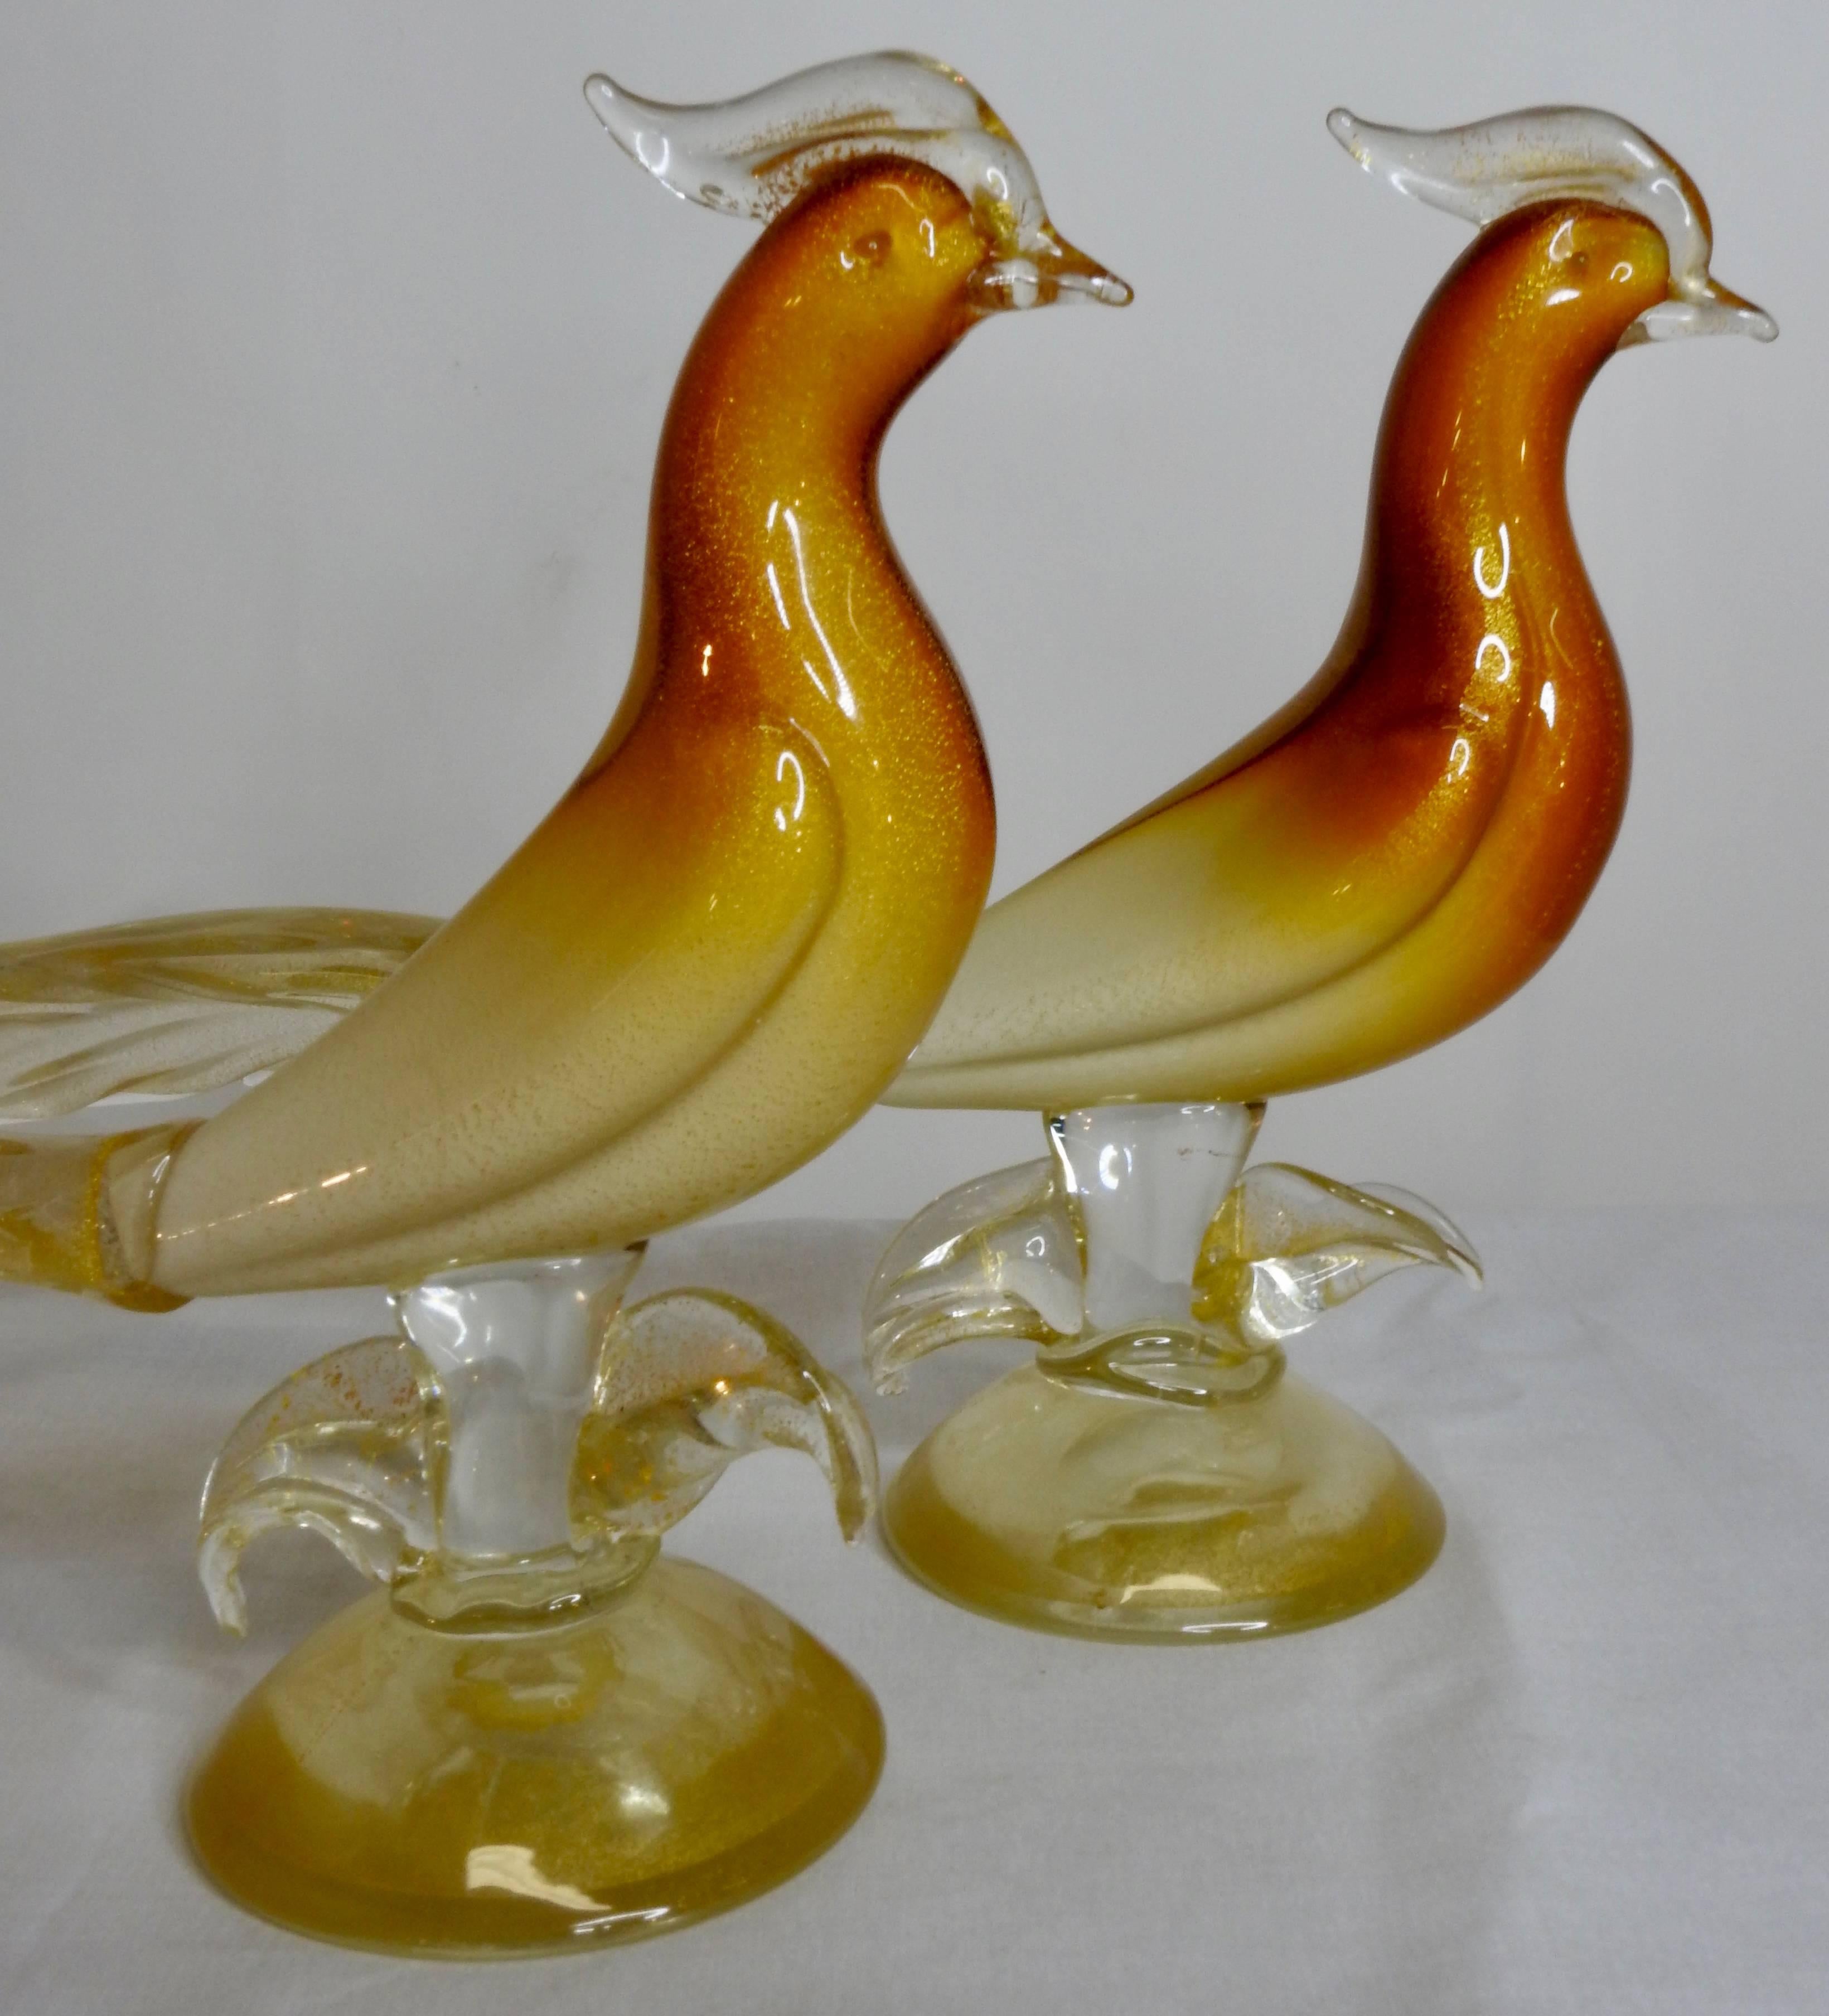 Pair of Salviati & Co. Murano glass pheasants. These beautiful birds are done in brilliant amber, gold and white tones. The pair are perched on top of round bases with foliate detail. Rising next to the body of the birds which have a white under